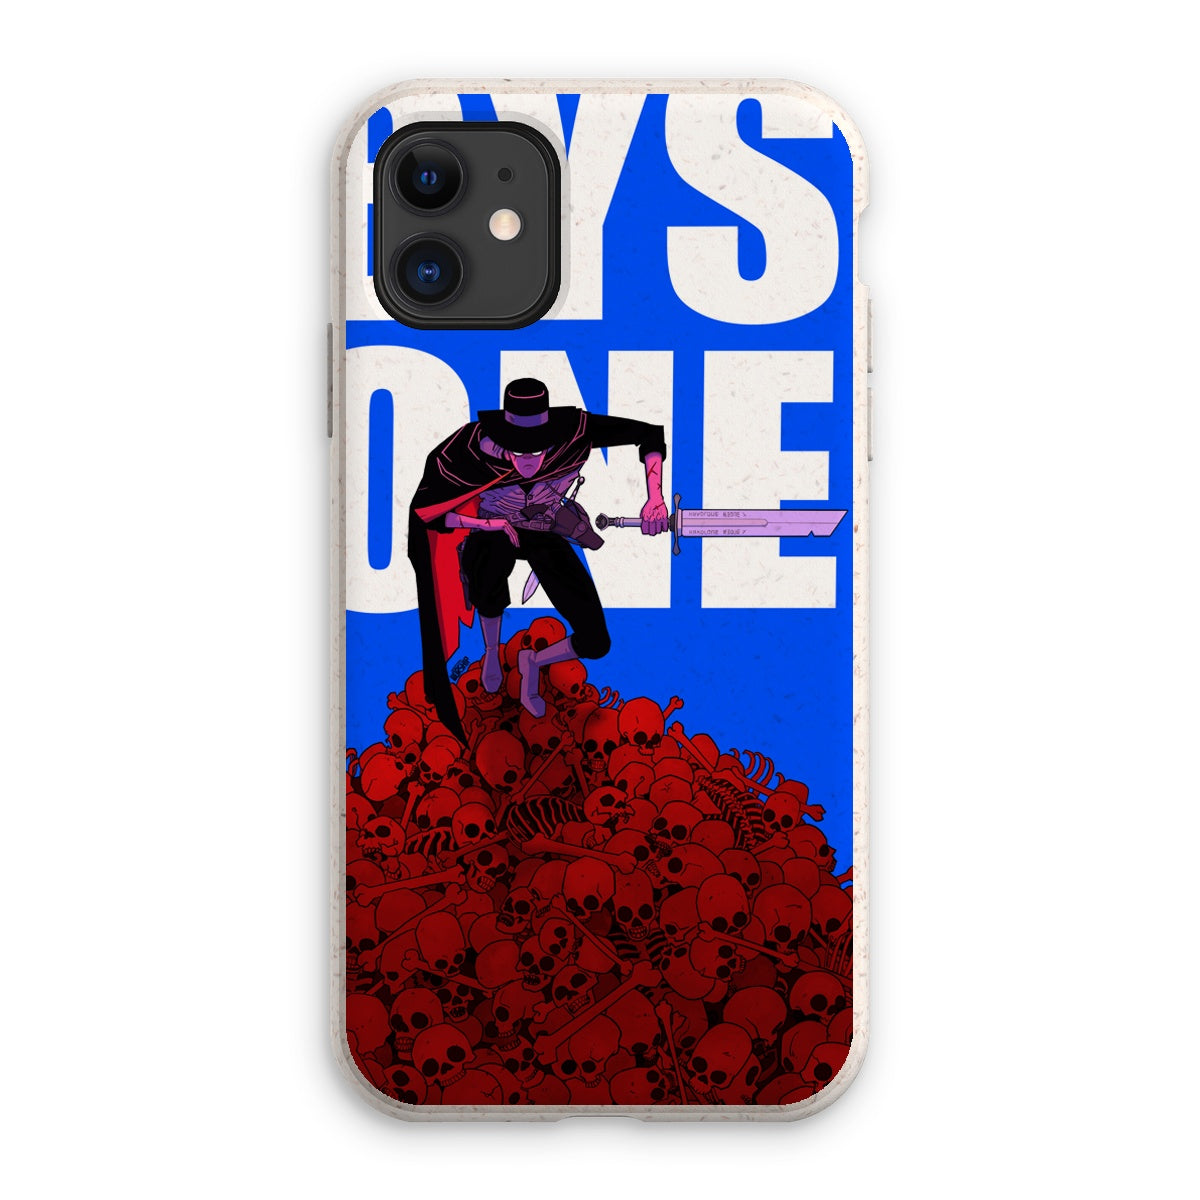 Unique and cool Gorillaz-style abyss of bones phone case illustration